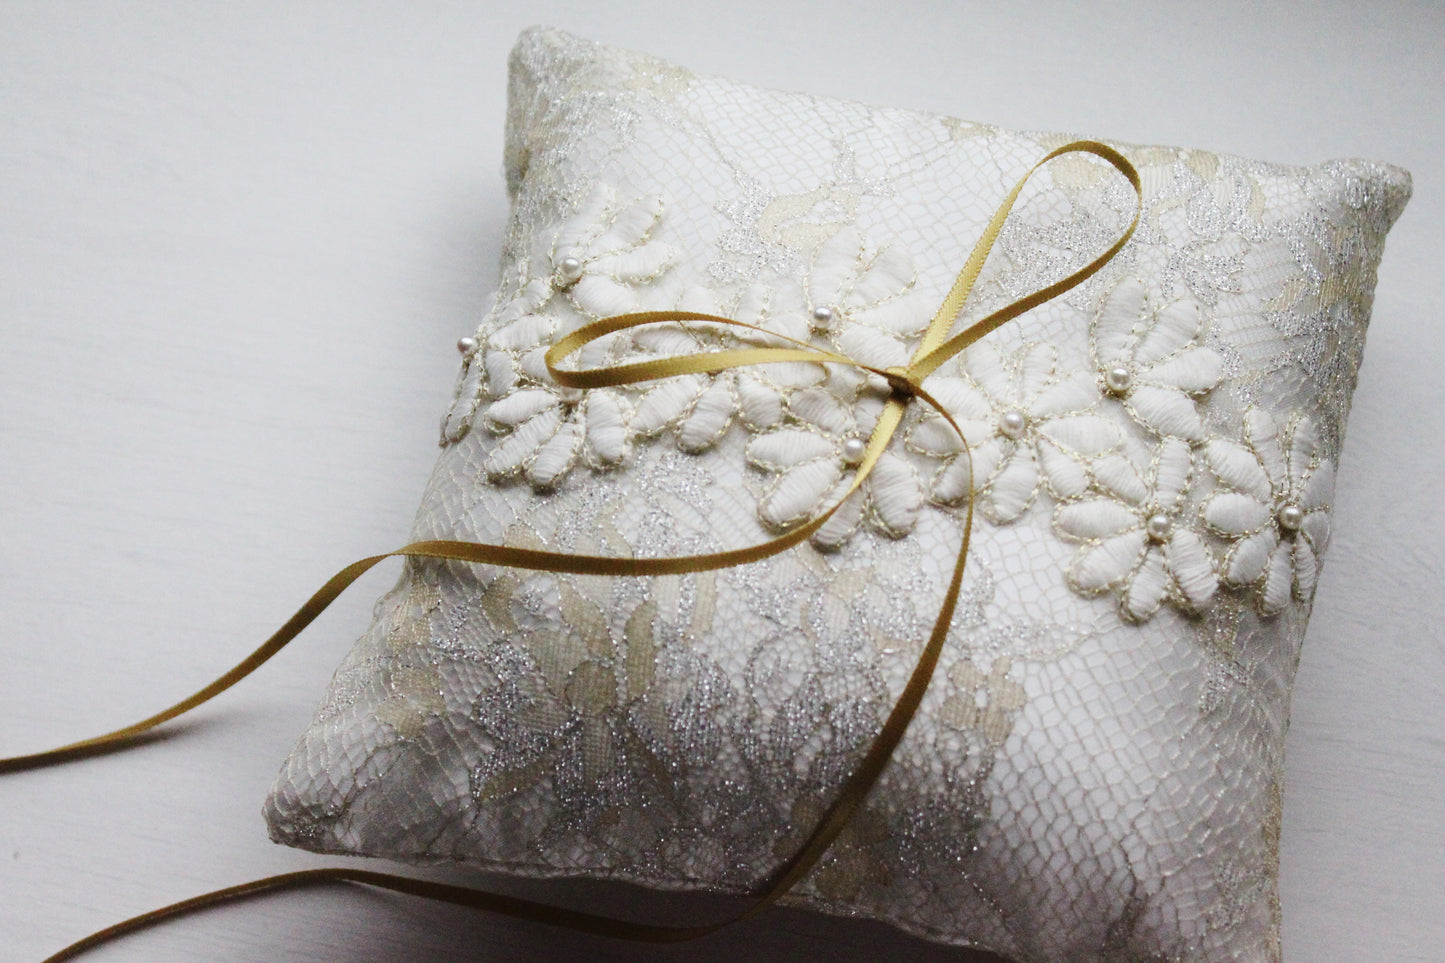 Floral Embroidery Ring Pillow in Gold and Silver